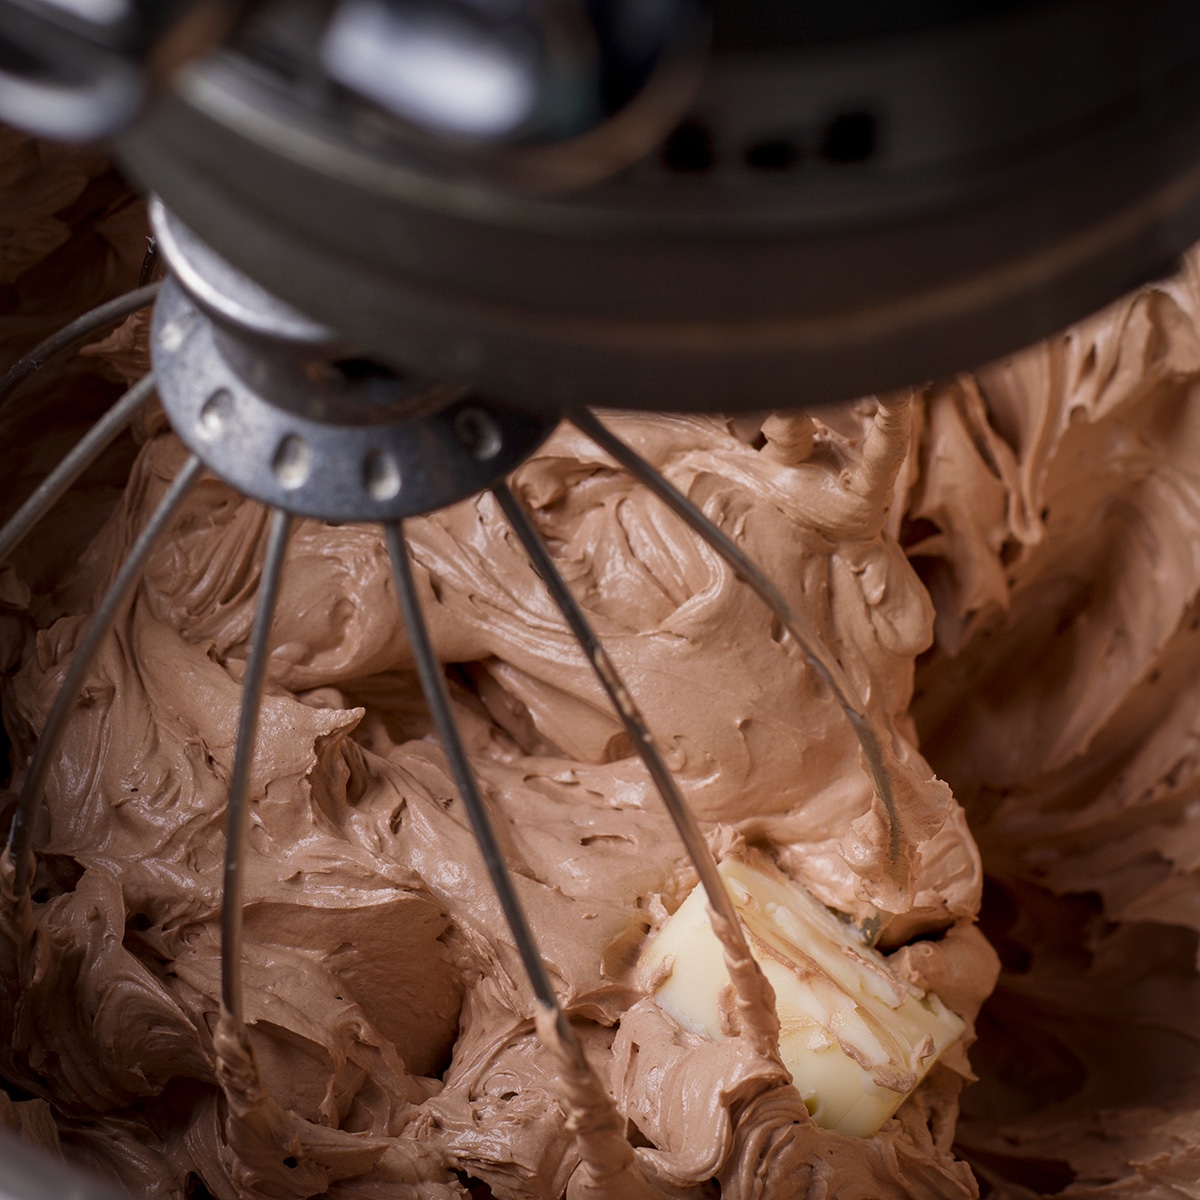 Looking down into a mixing bowl while an electric mixer beats butter into milk chocolate buttercream frosting.